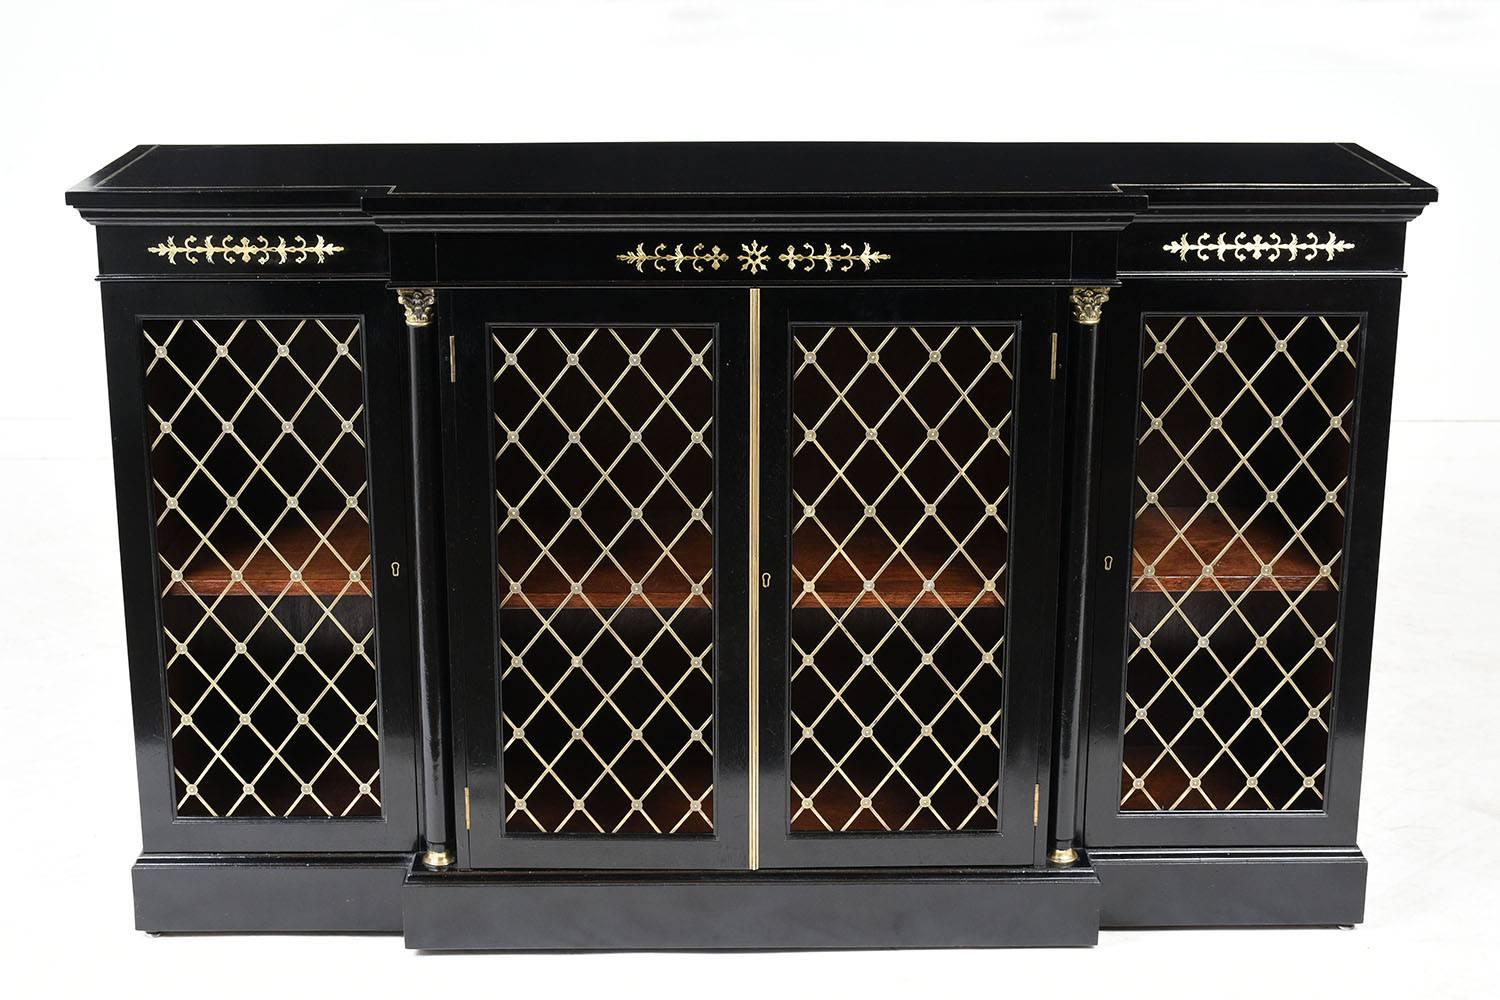 This 1910s Regency-style bookcase is made of mahogany with an ebonized and lacquered finish. The wood top features a brass boarder accent. The bookcase has carved columns flanking the jutted out center section and brass accents on the columns and